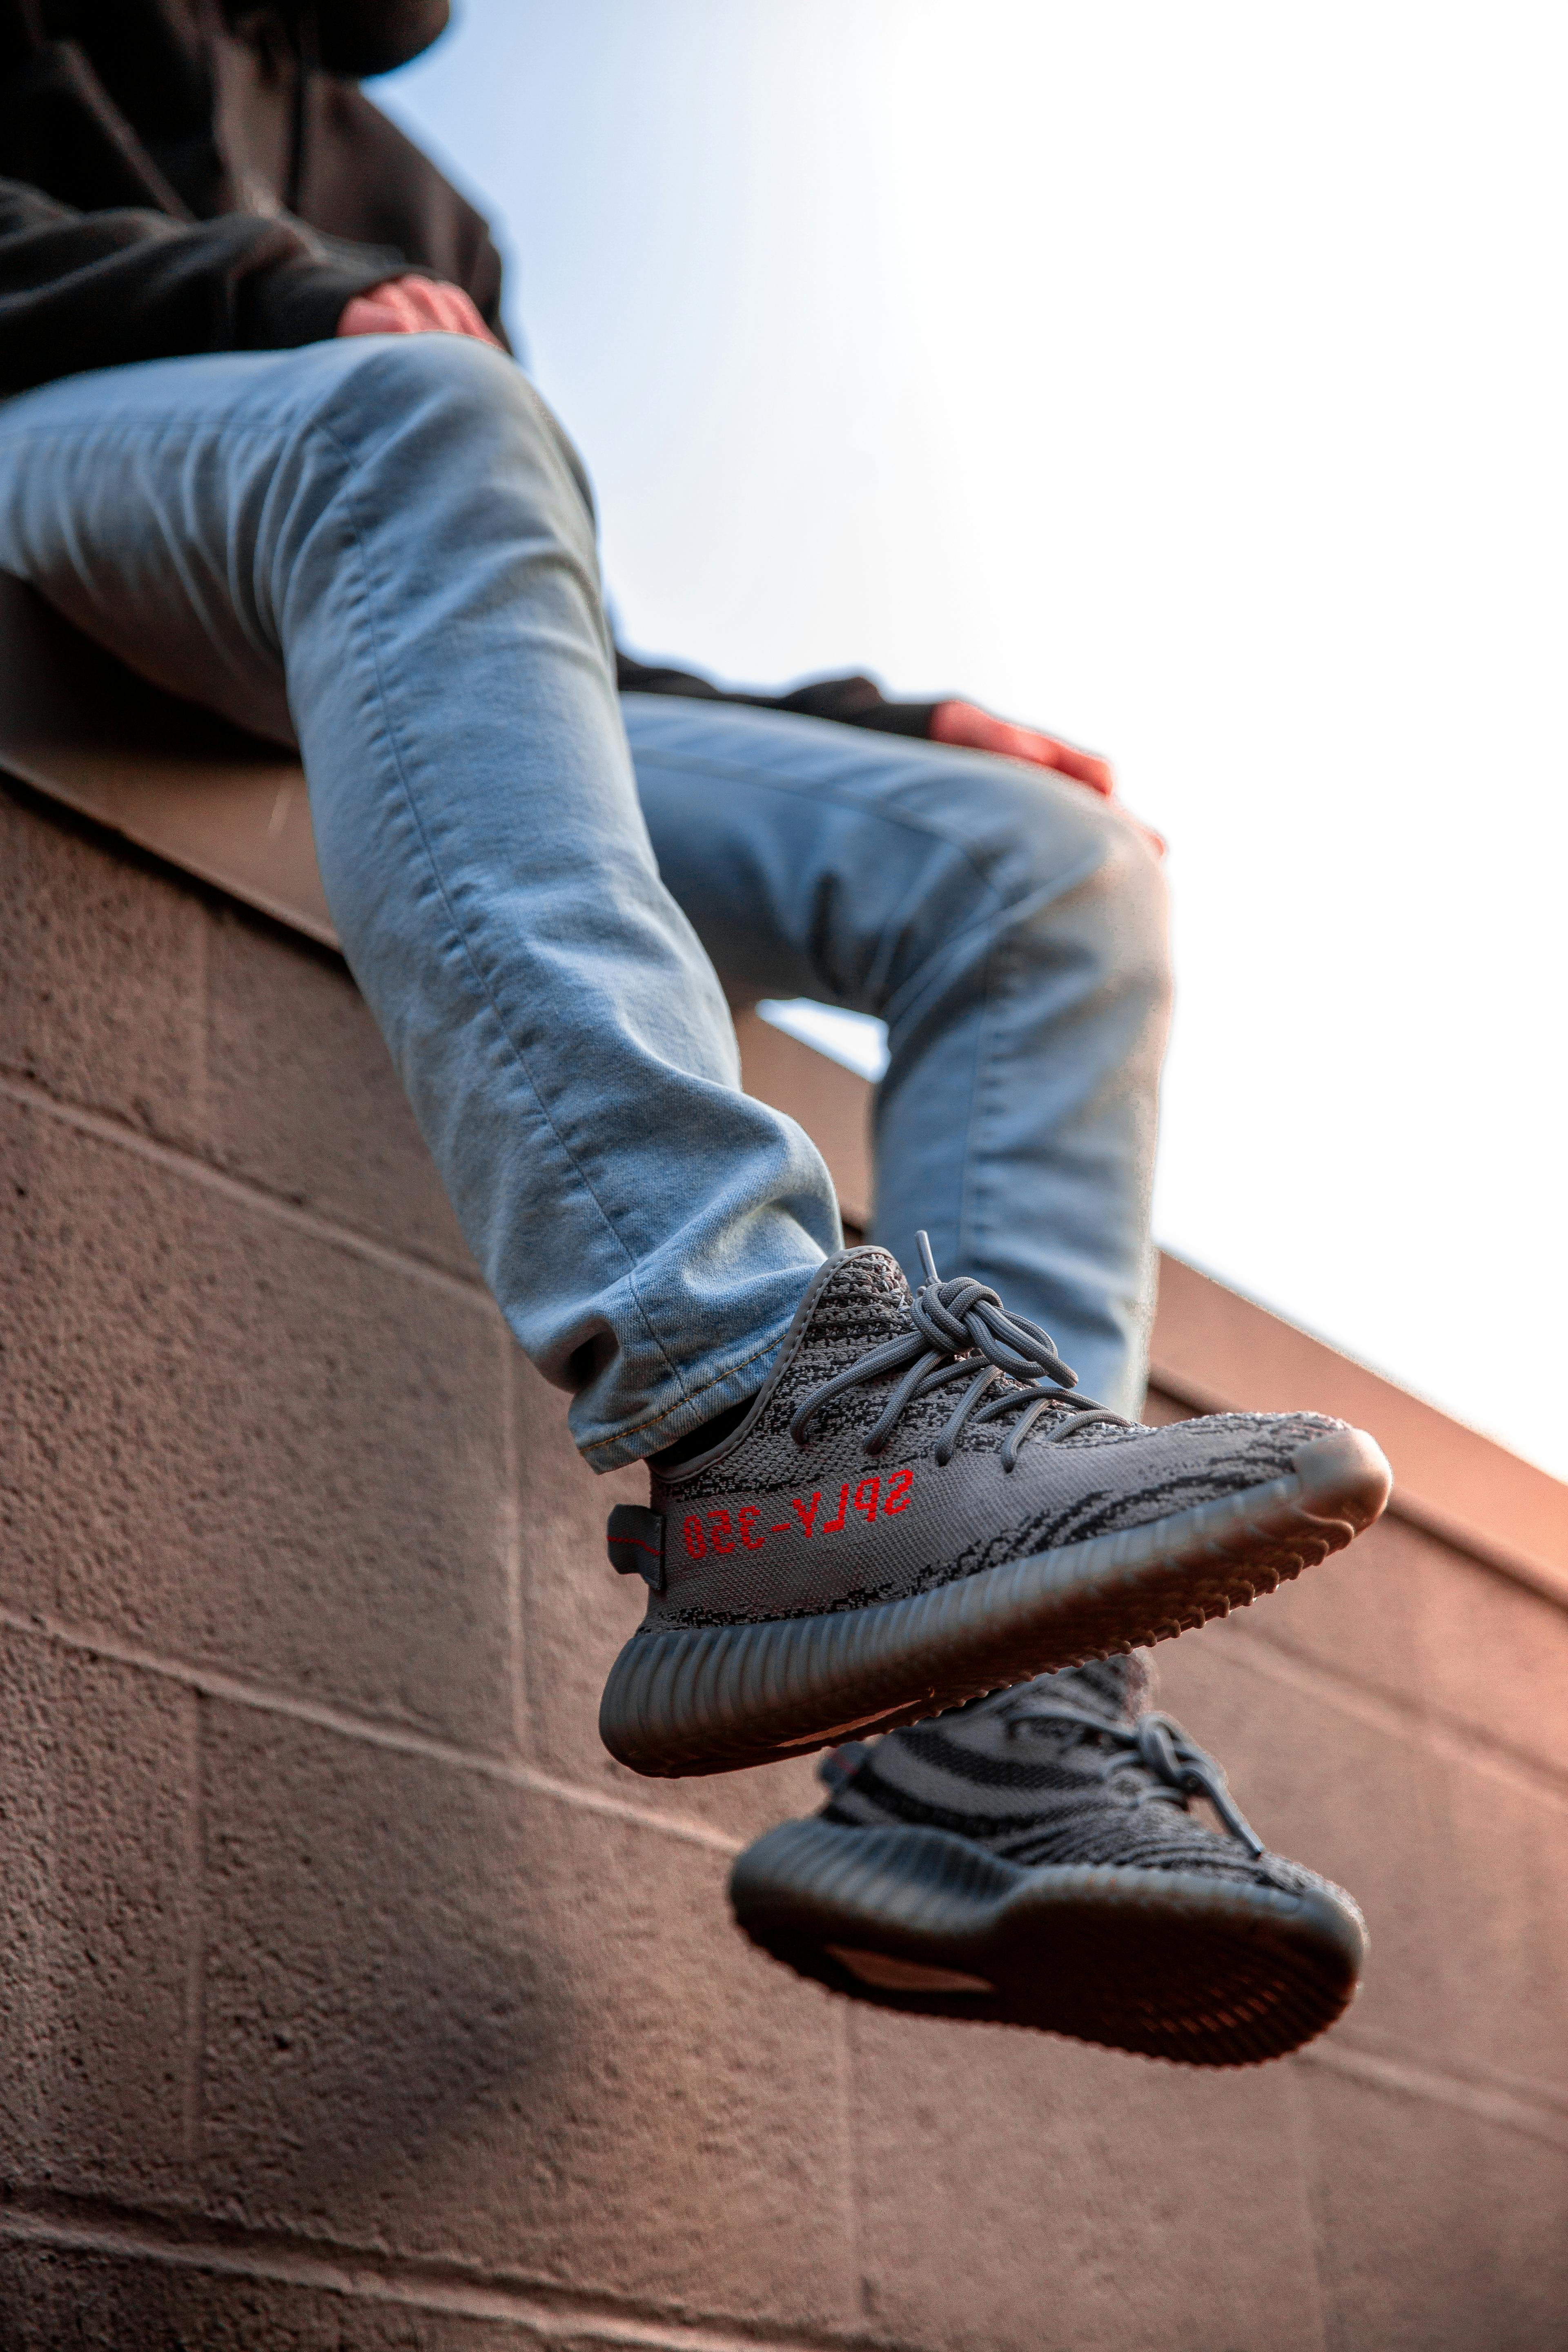 Person Wearing Adidas Yeezy Boost Shoes · Free Stock